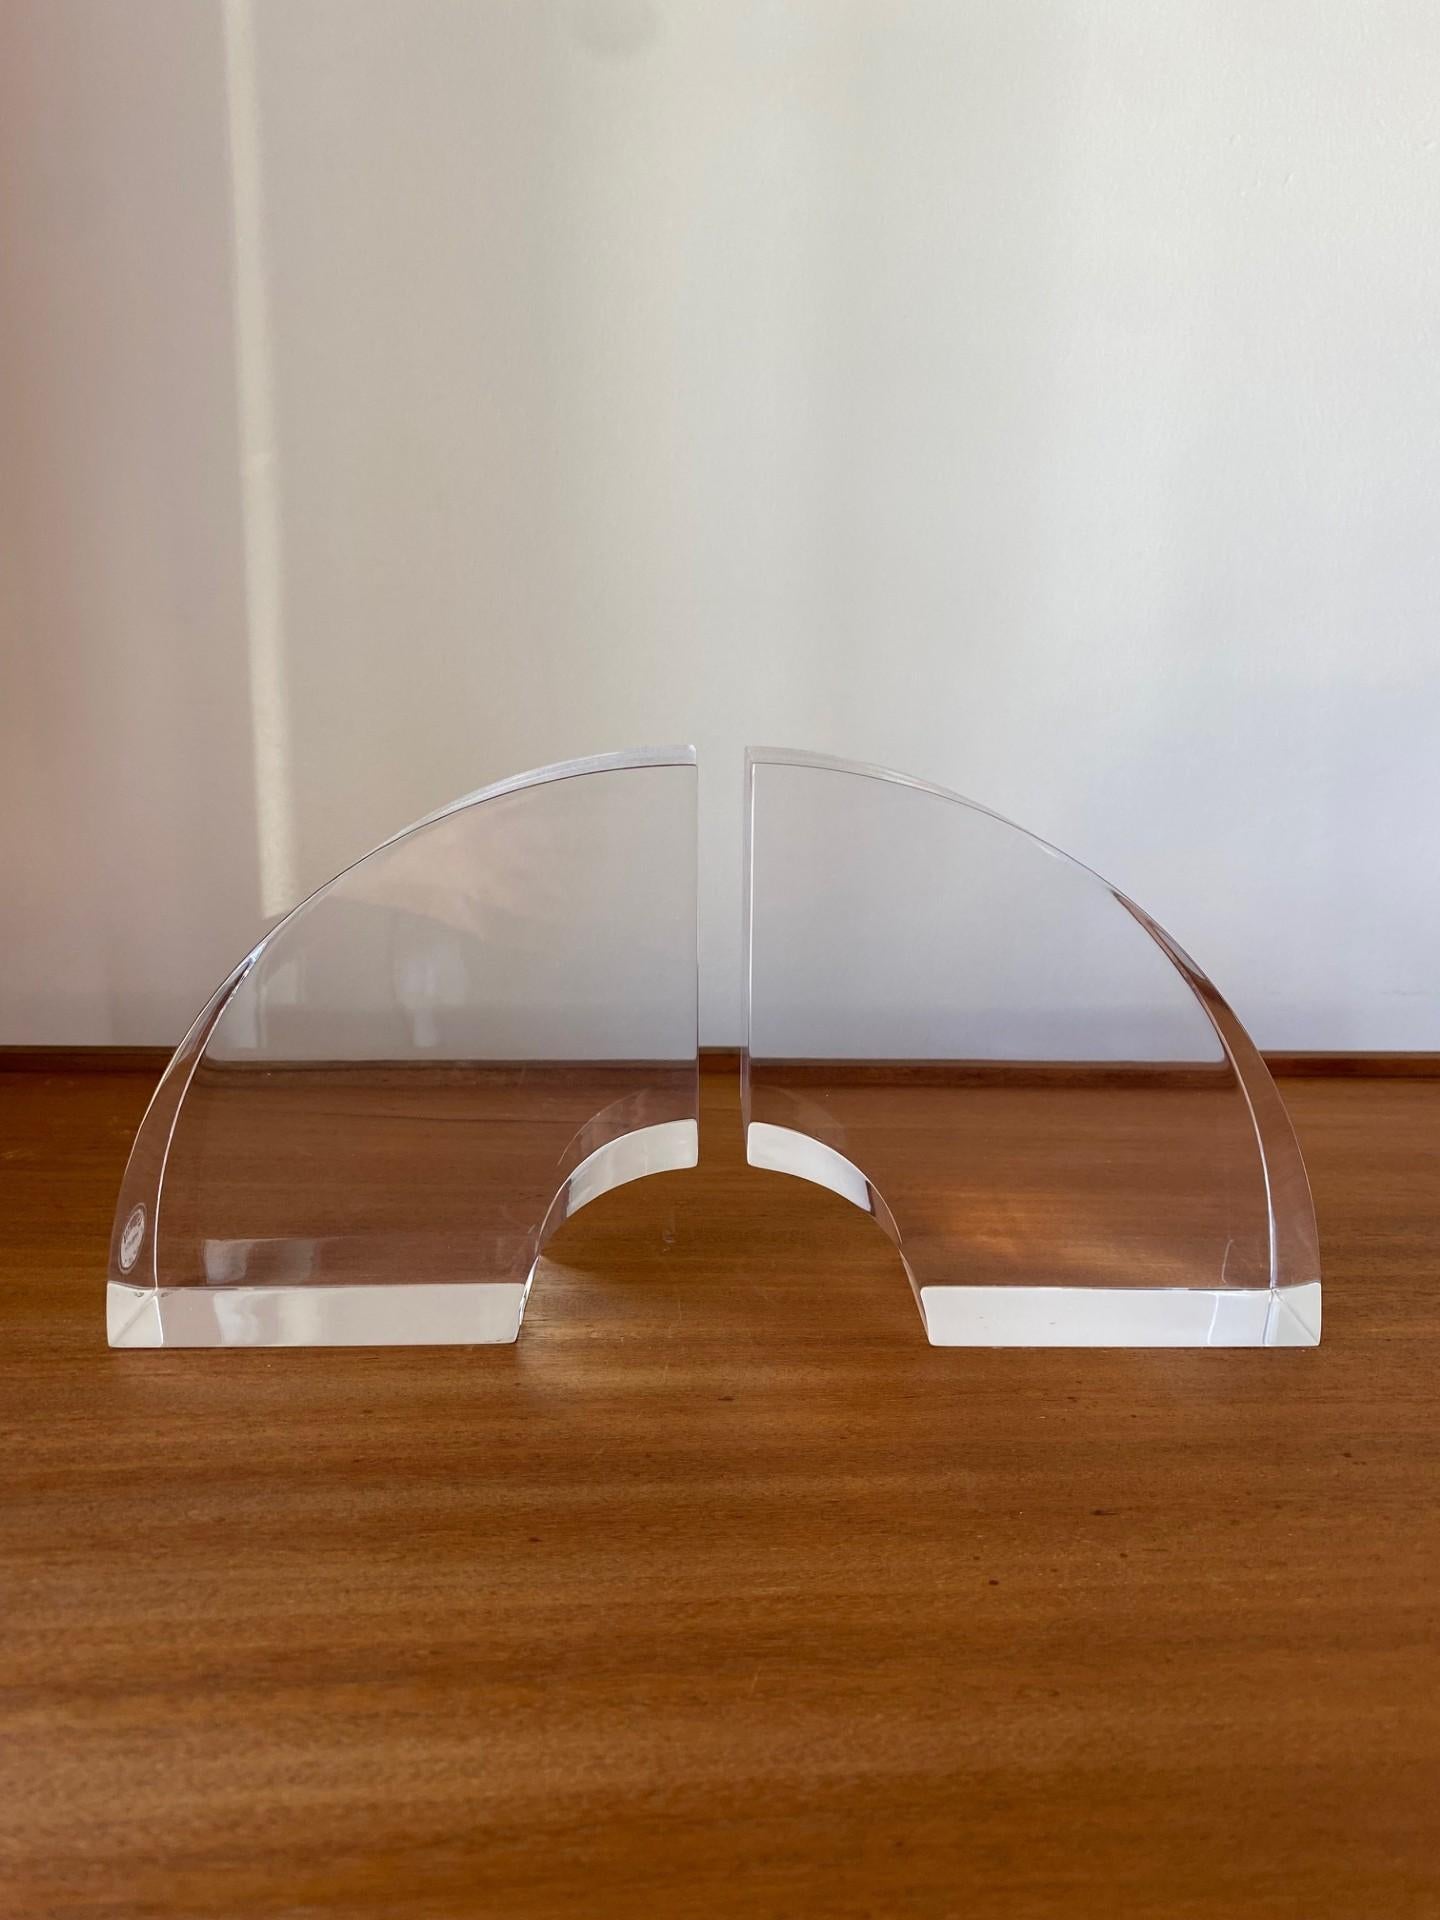 Vintage Curved Astrolite Lucite Bookends by Ritts Co. of Los Angeles For Sale 7